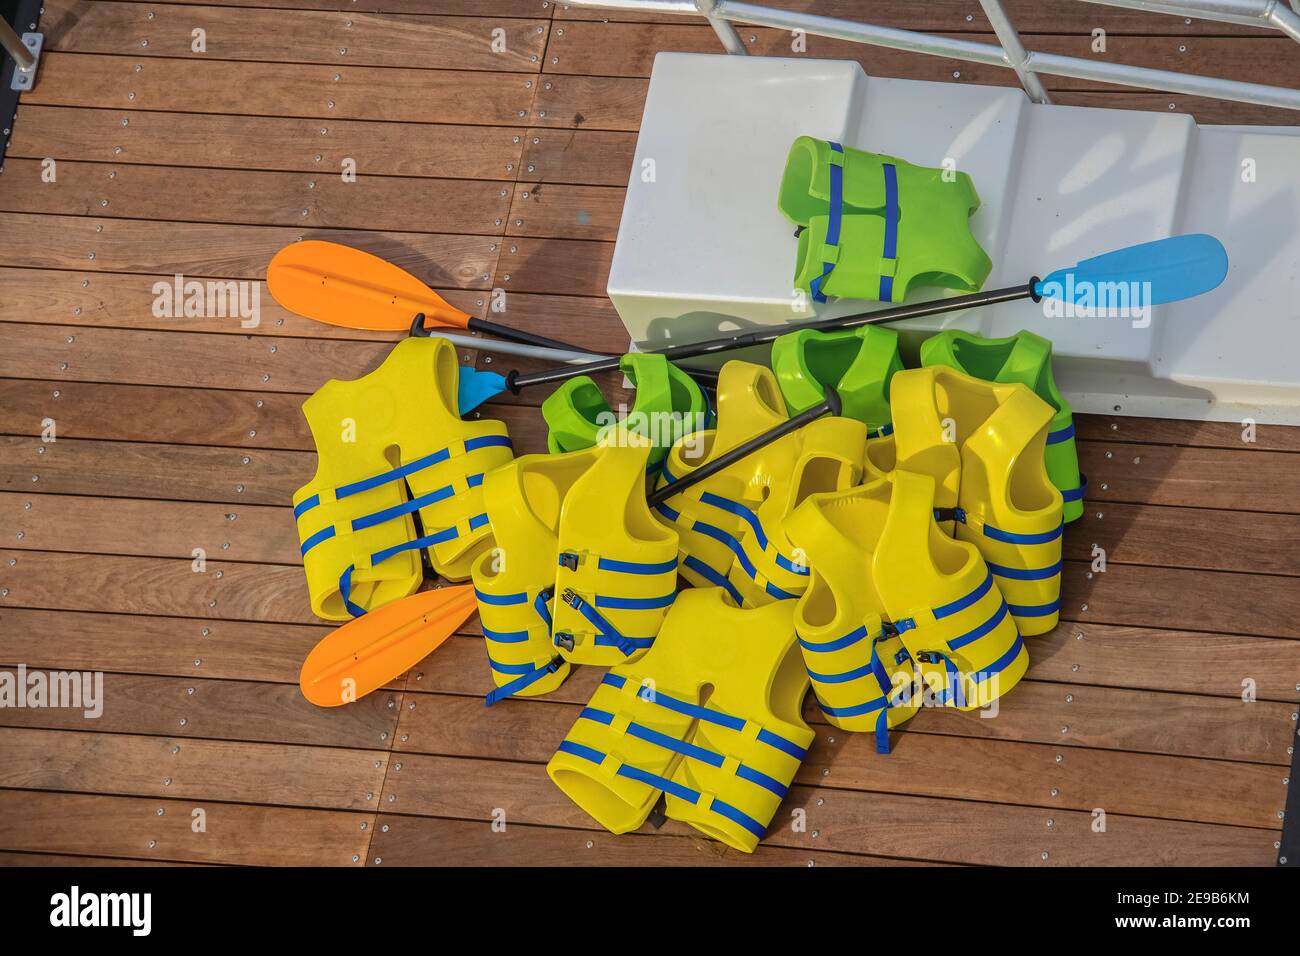 A pile of yellow and green life vests with boat paddles piled on a wooden dock and some white plastic stairs Stock Photo